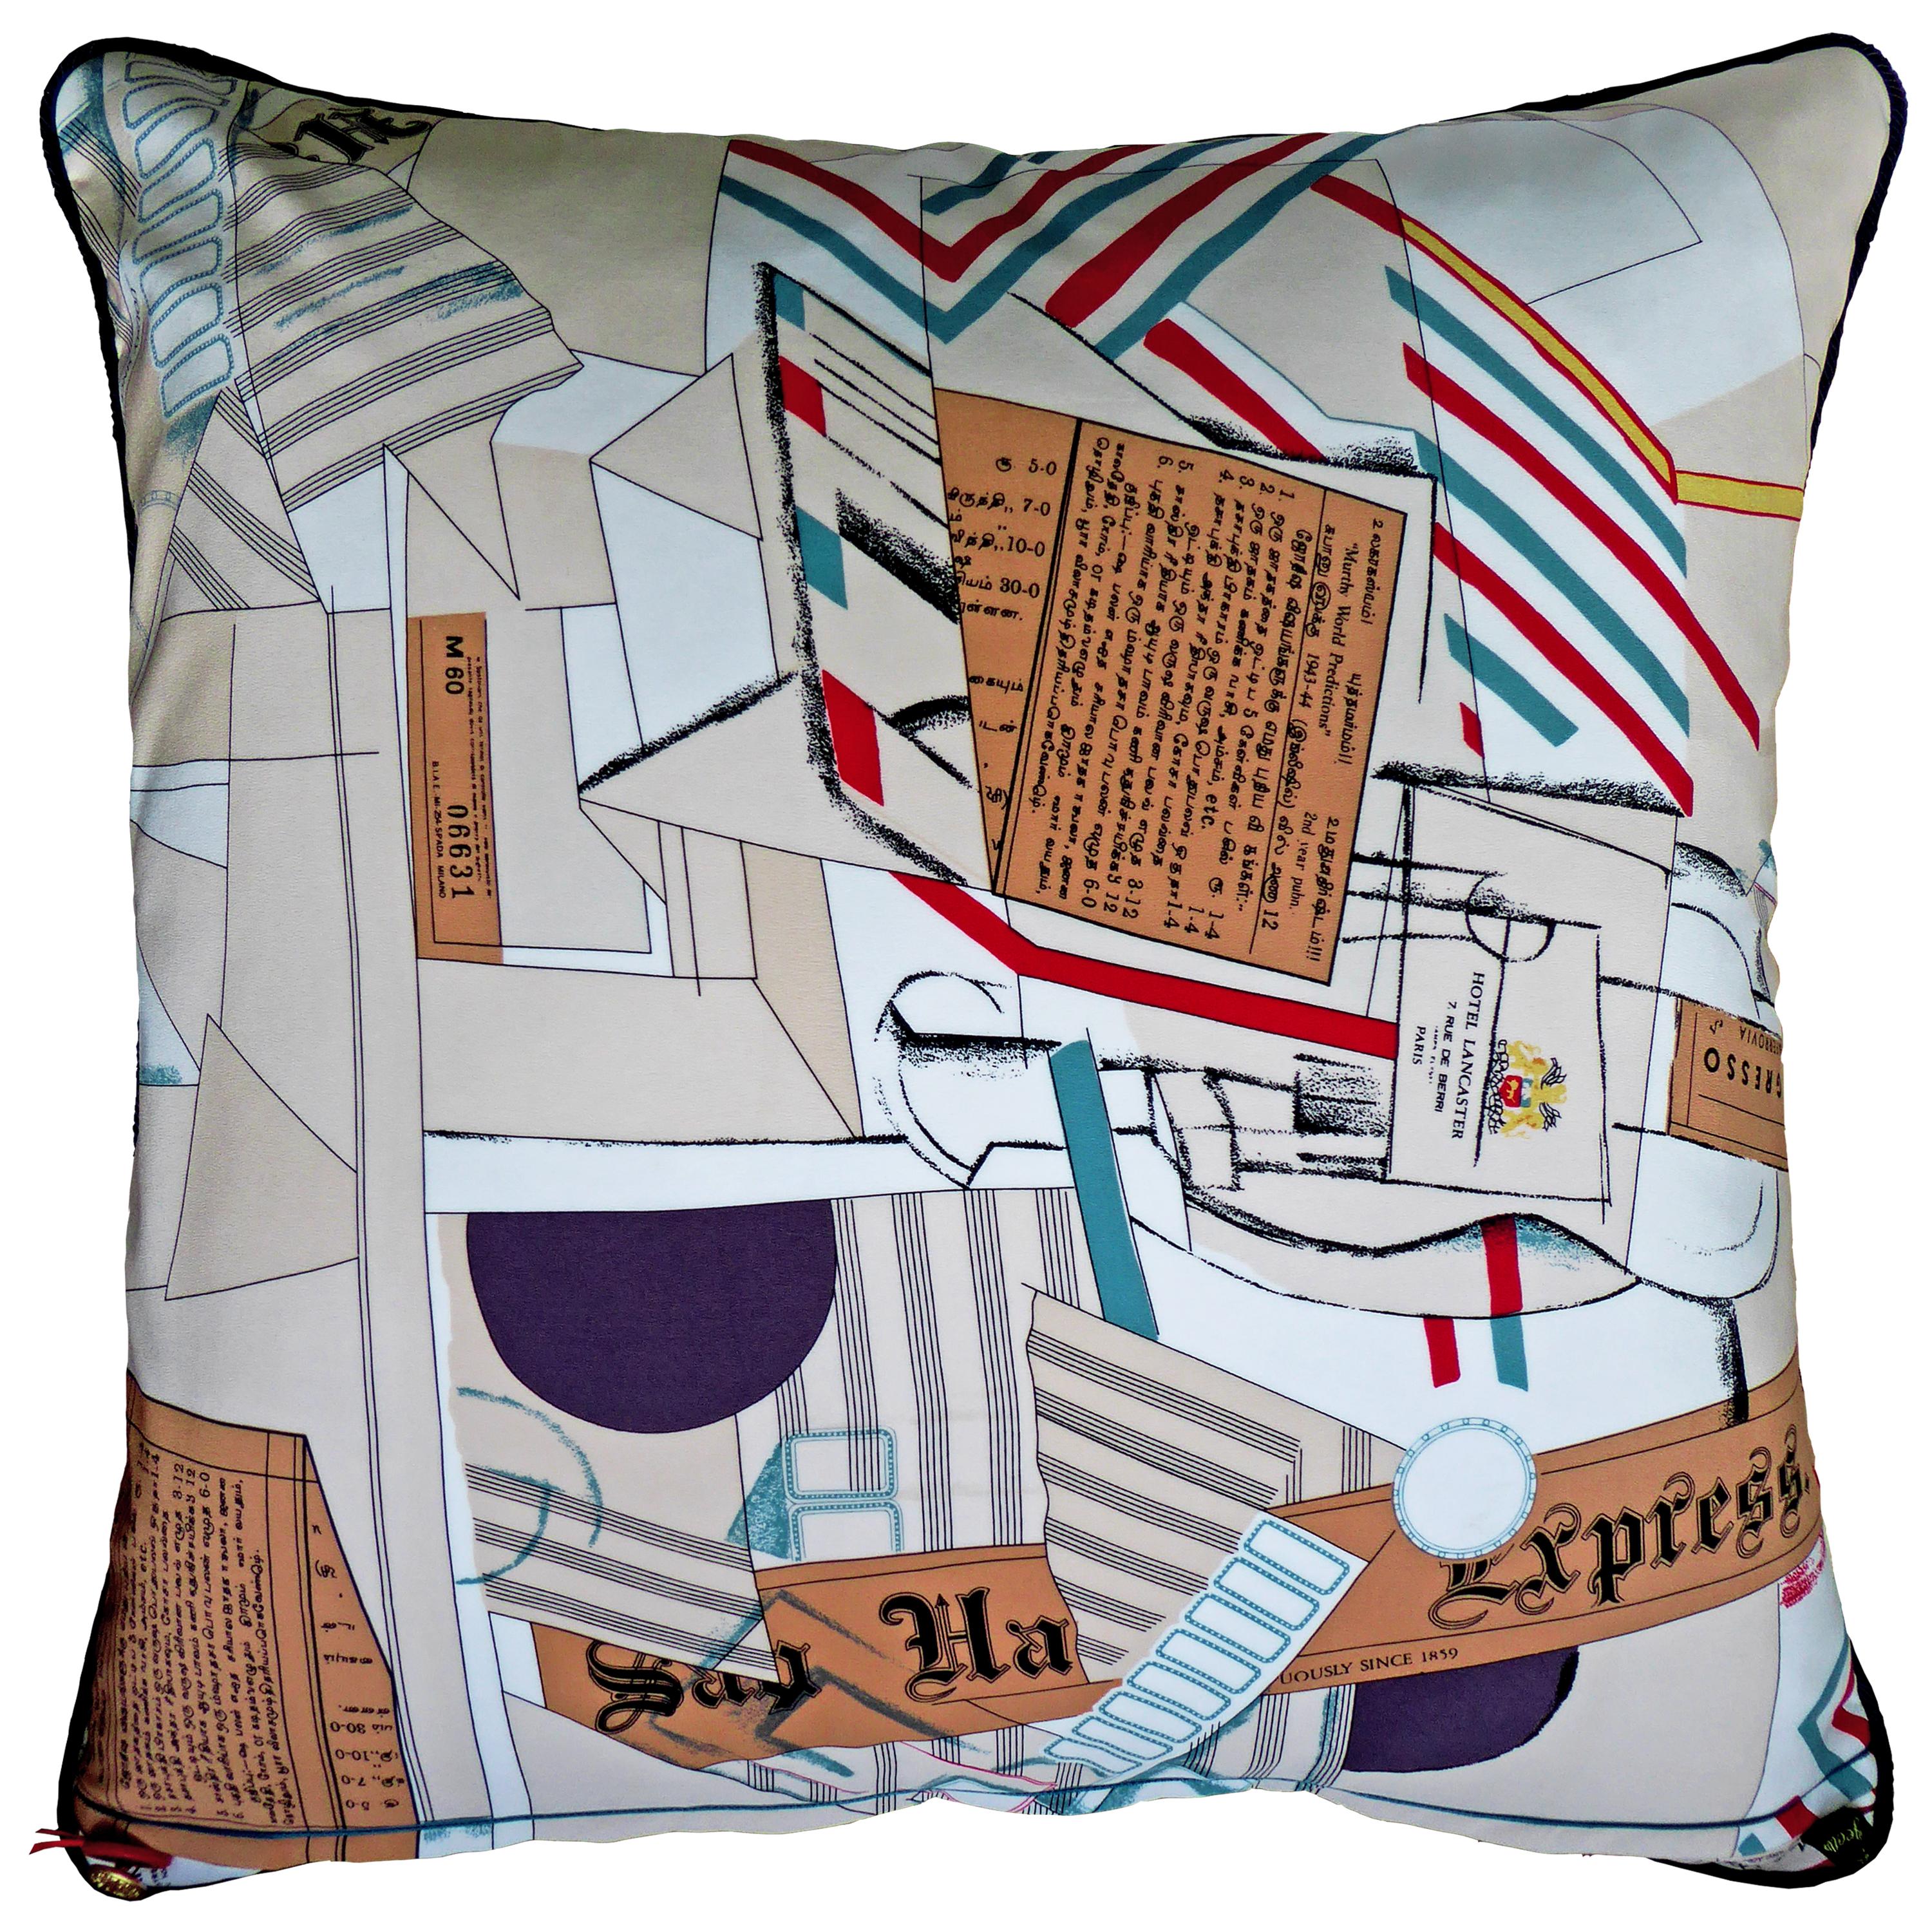 The Star Spangled Banner,
circa - 1960 and 1980 
British made bespoke luxury cushion created using original vintage silks featuring two beautiful mismatch sides. The design on the front is an abstract motif based on the American flag complimented on